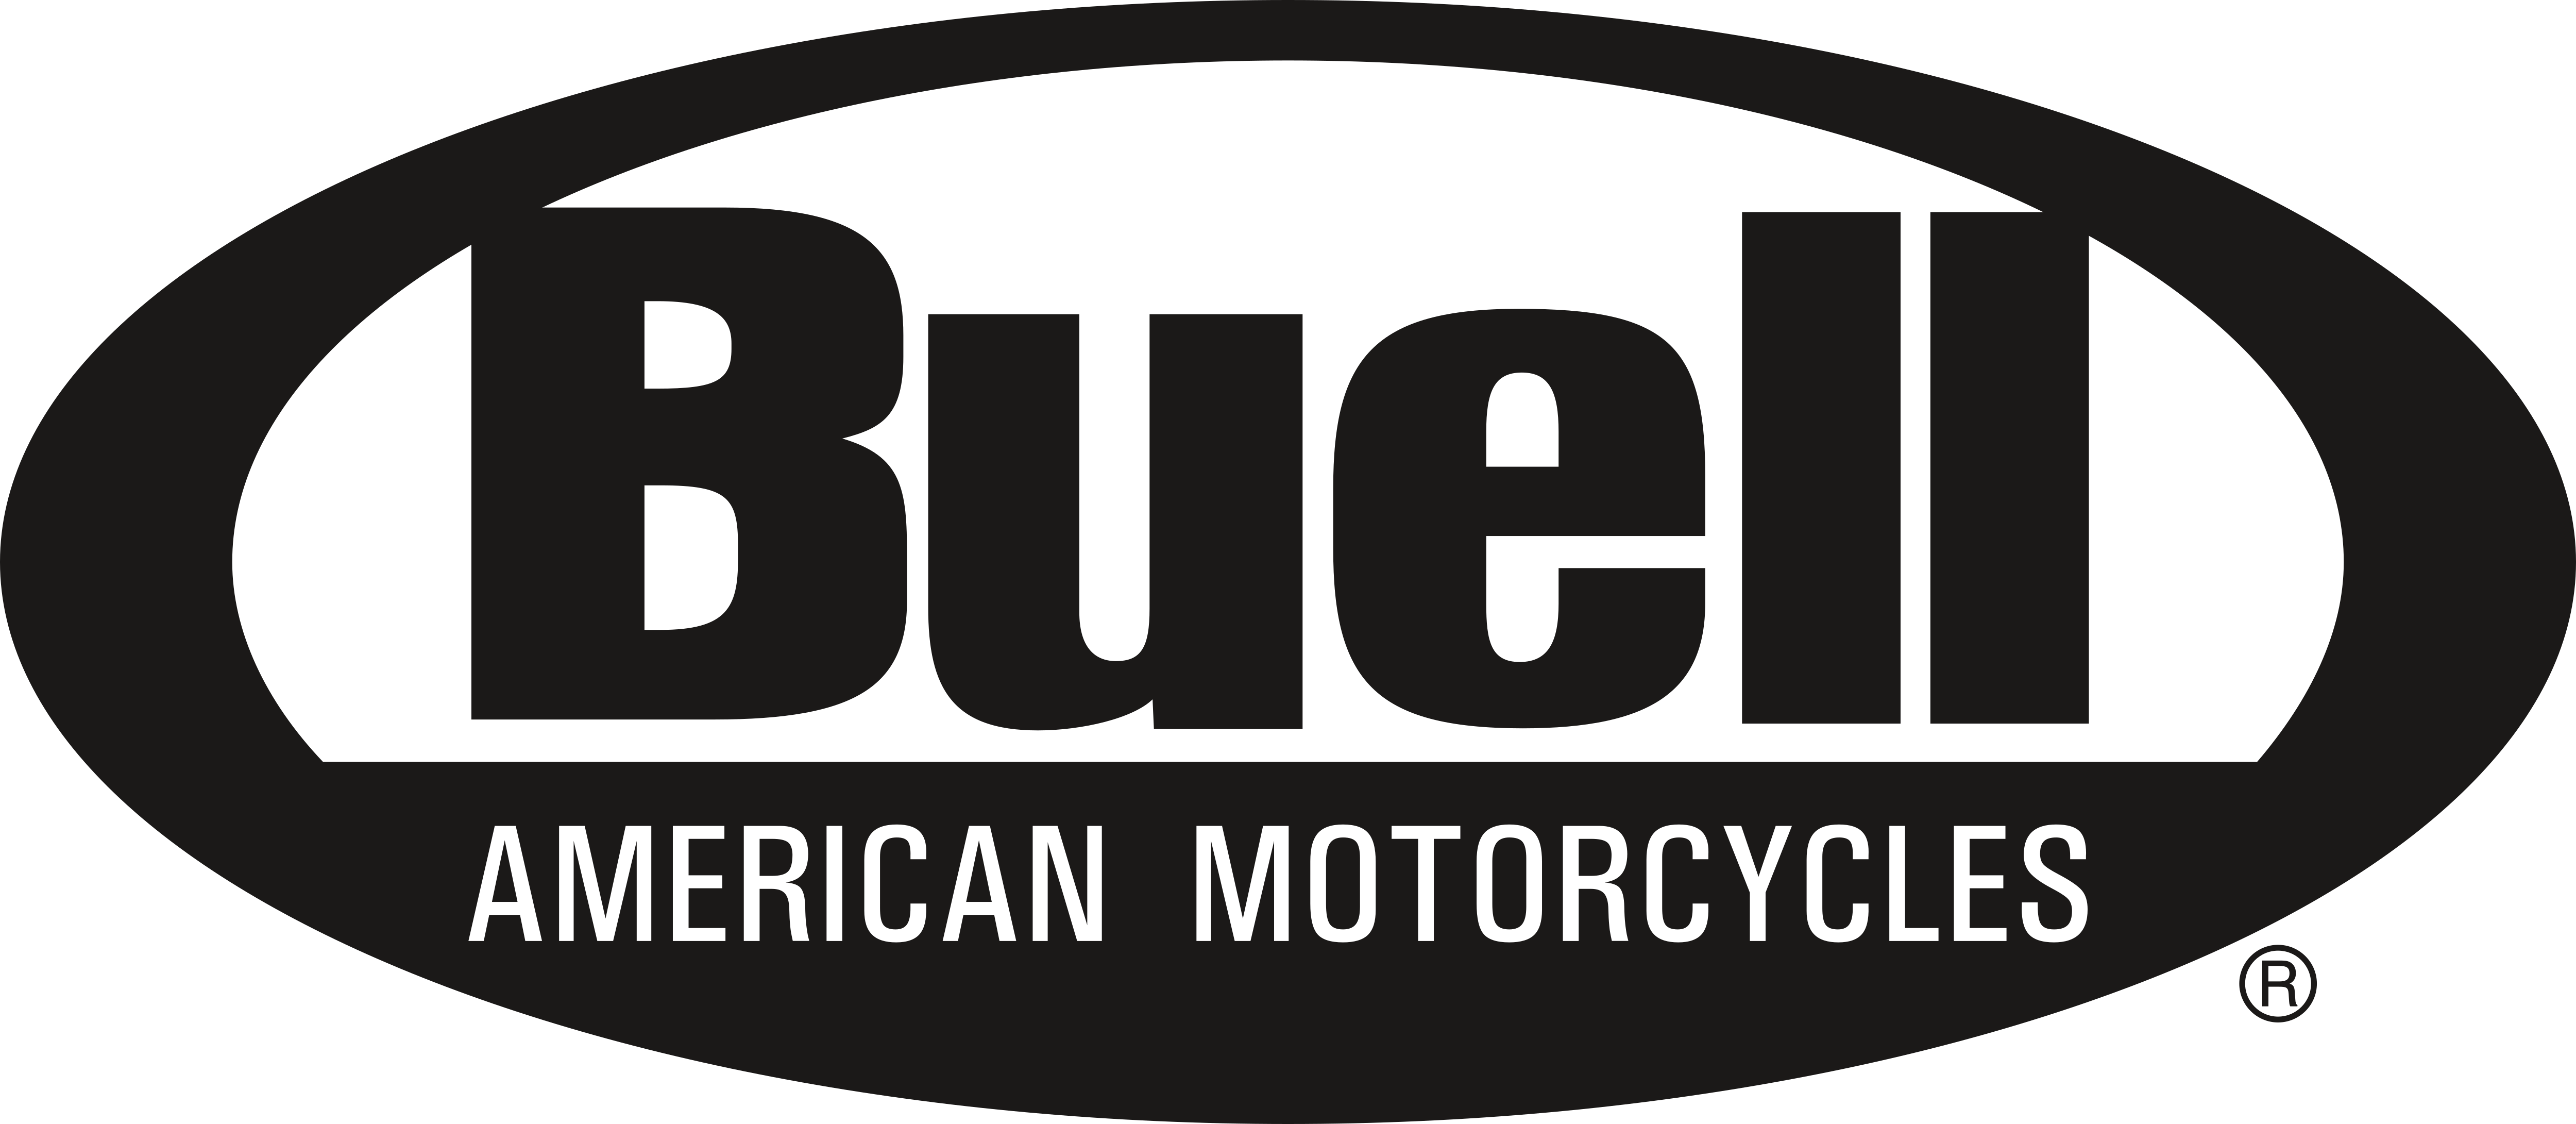 Buell – Logos Download